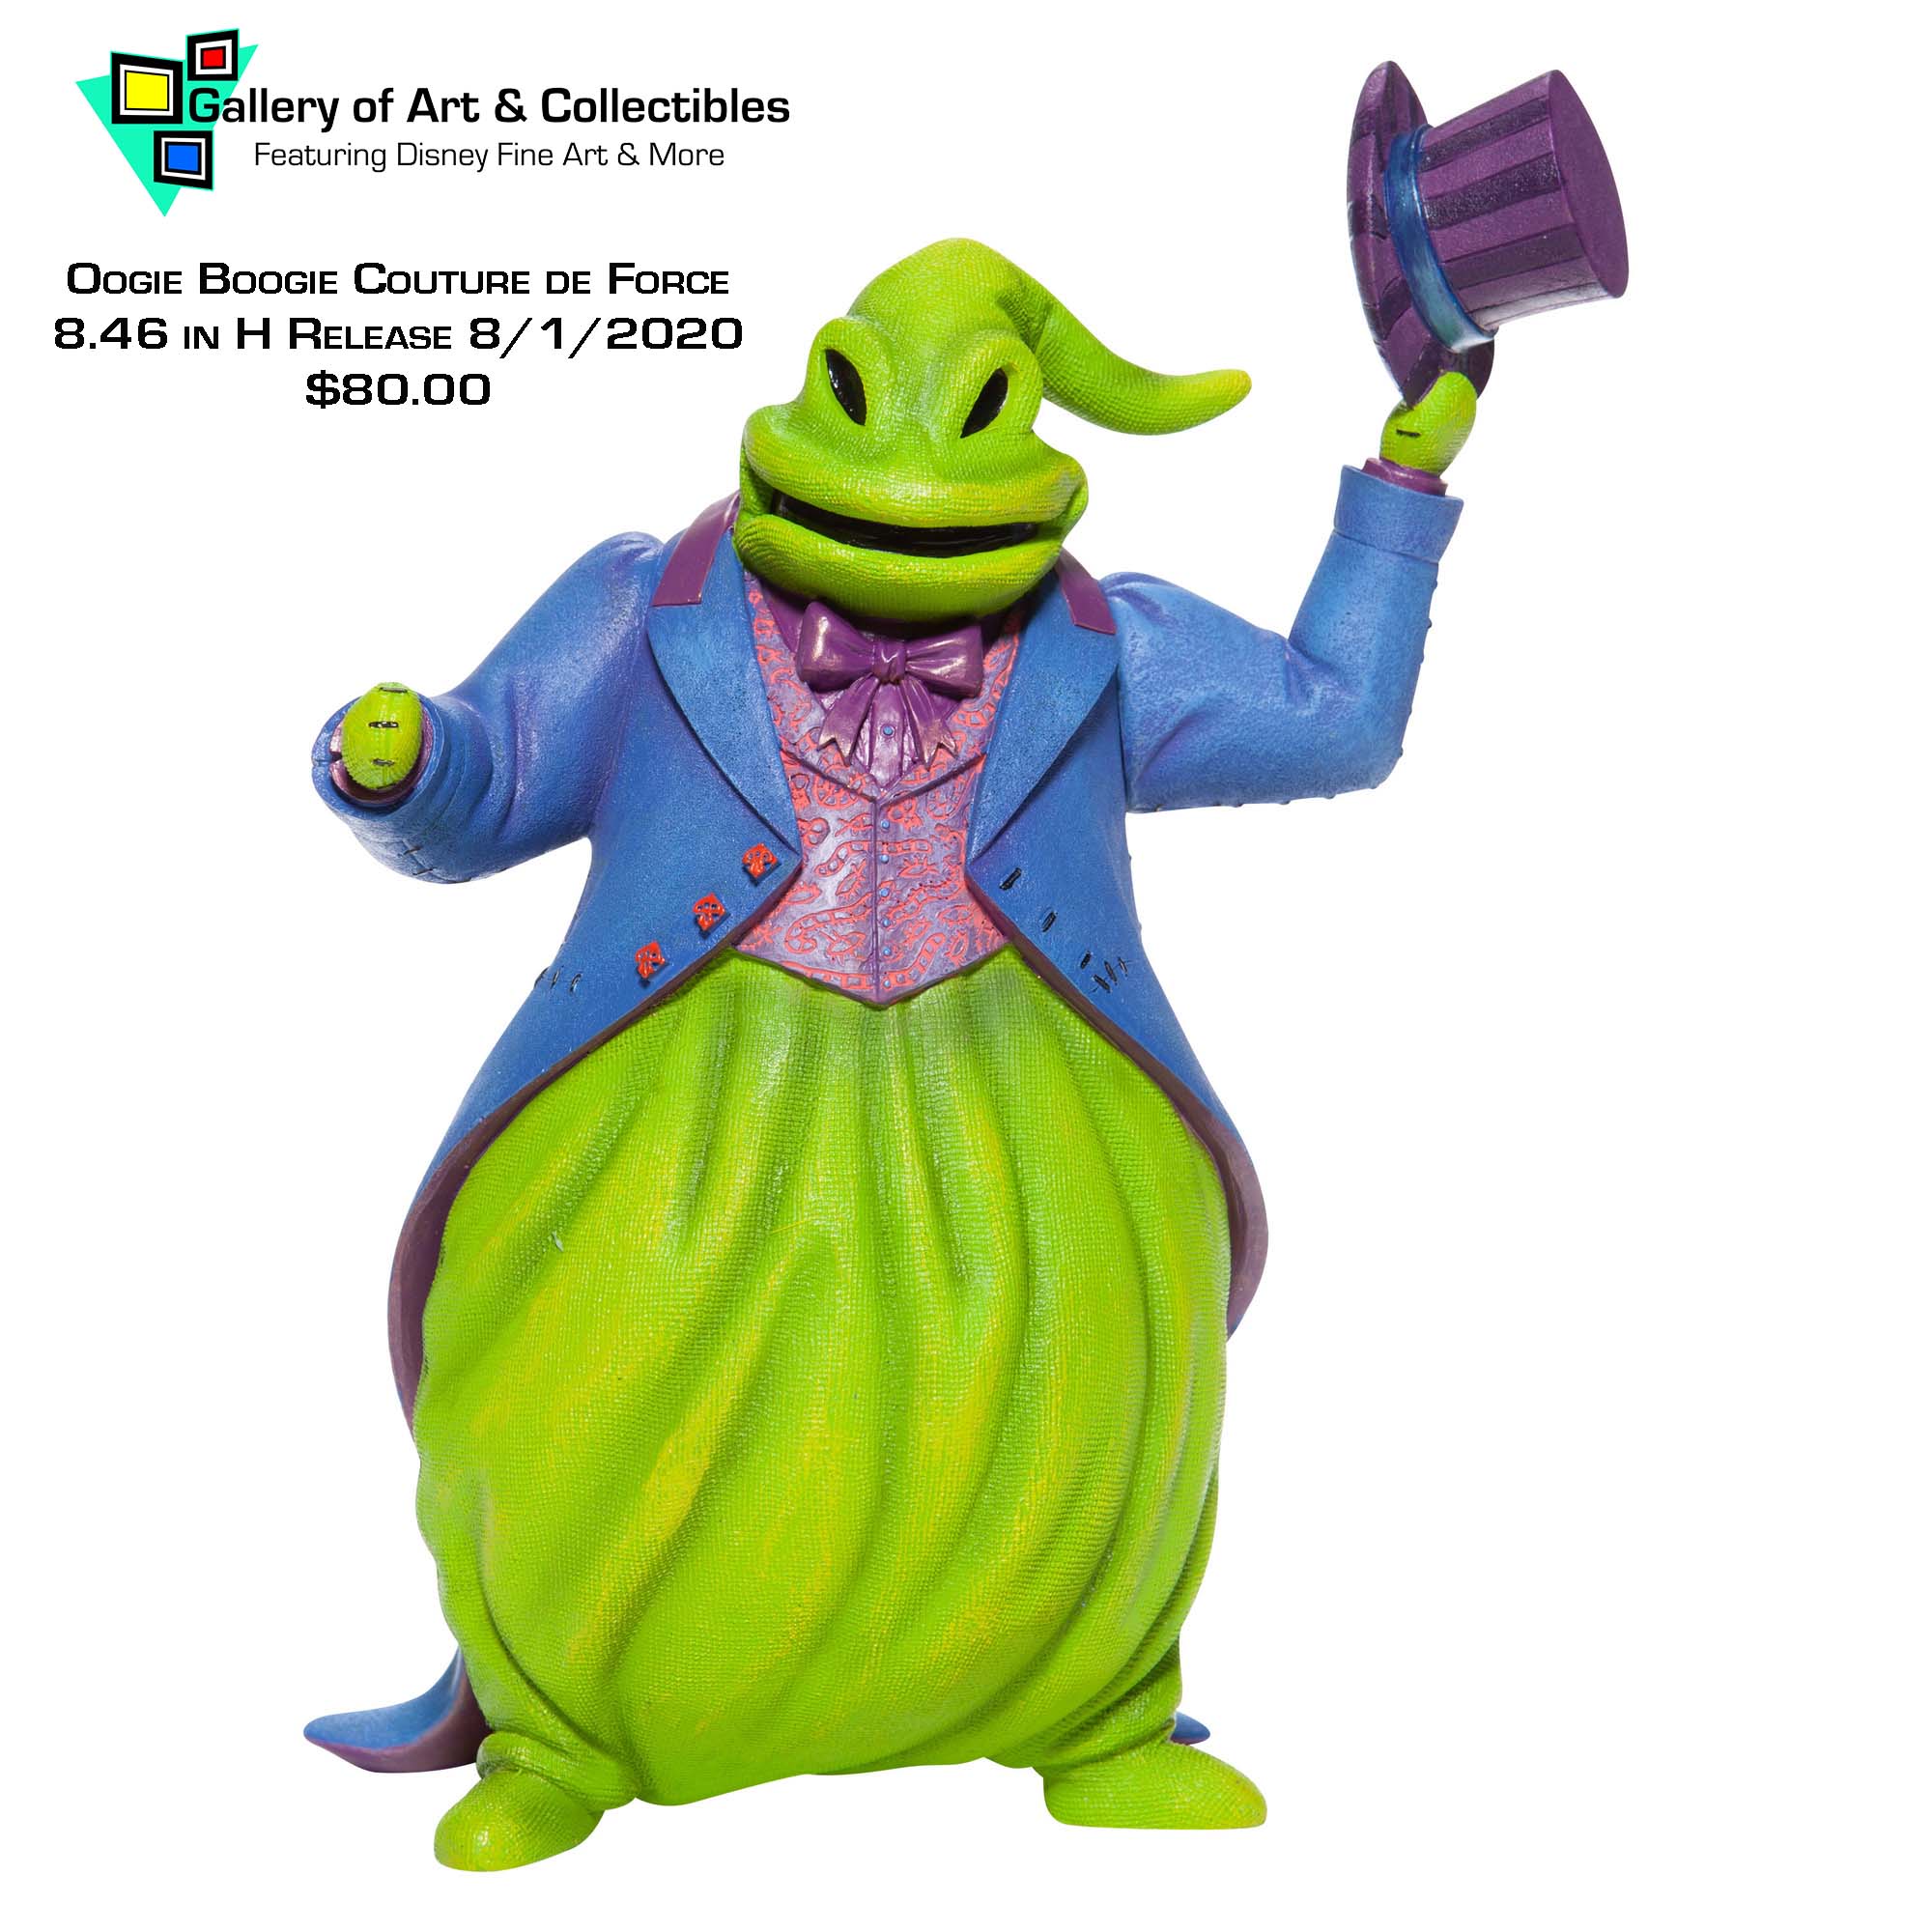 Oogie Boogie Showcase - Gallery of Art & Collectibles.